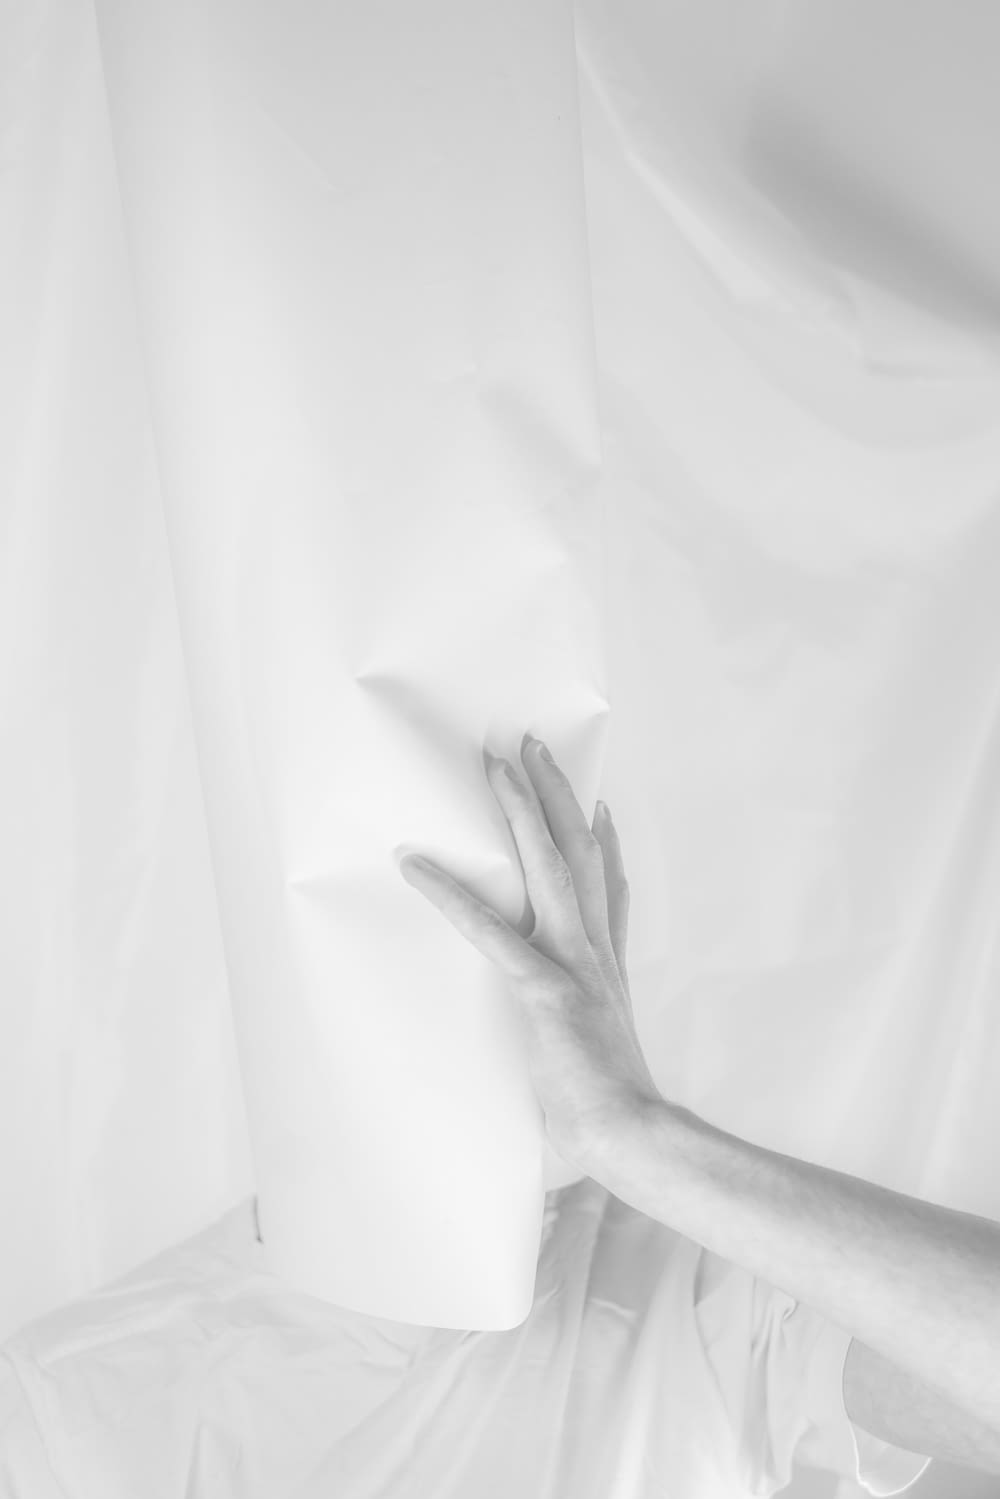 a person's hand on a sheet of white paper